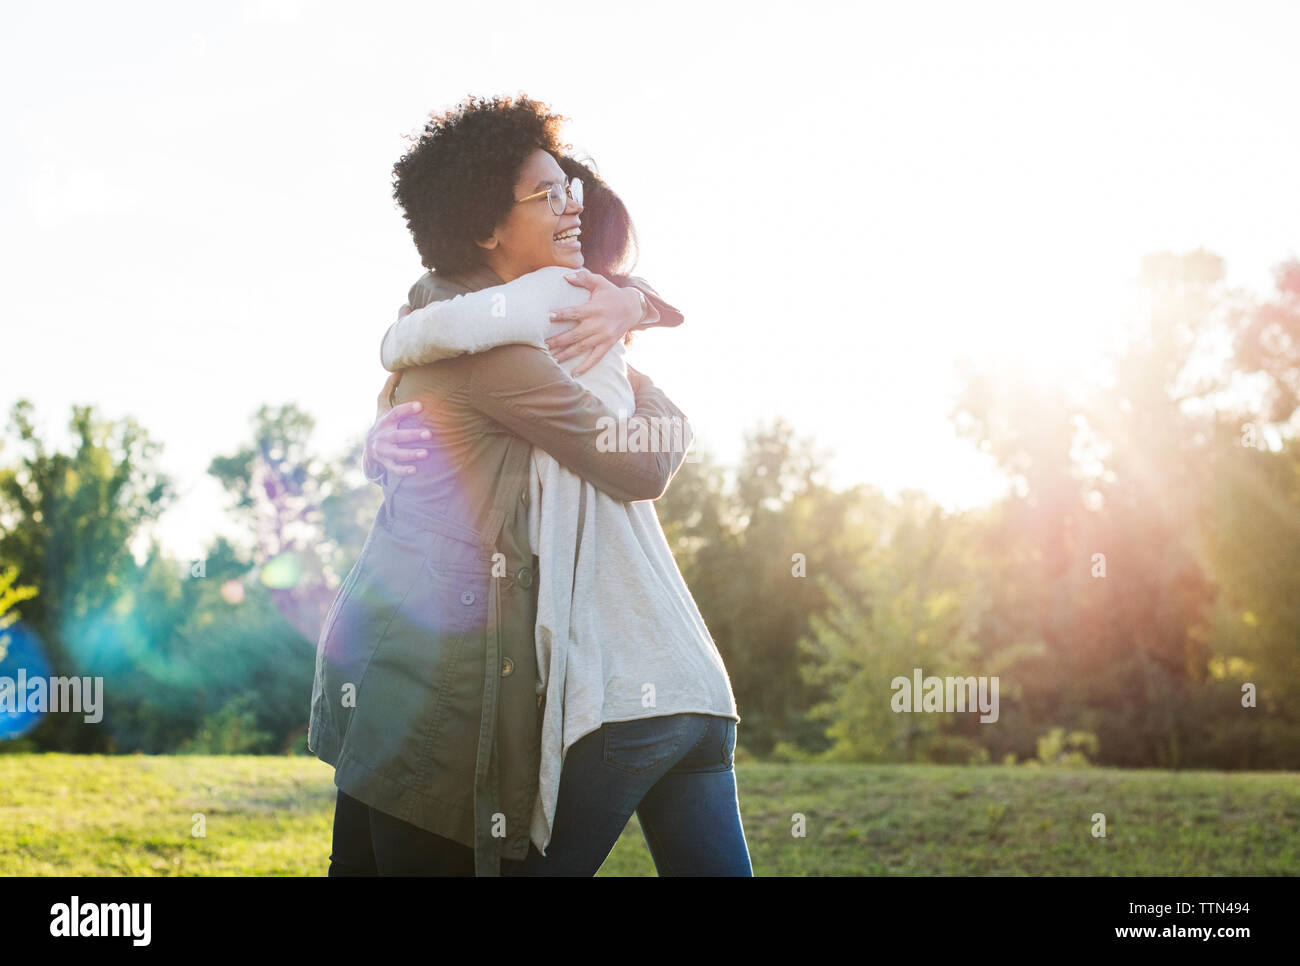 Smiling friends embracing on grassy field against clear sky Stock Photo